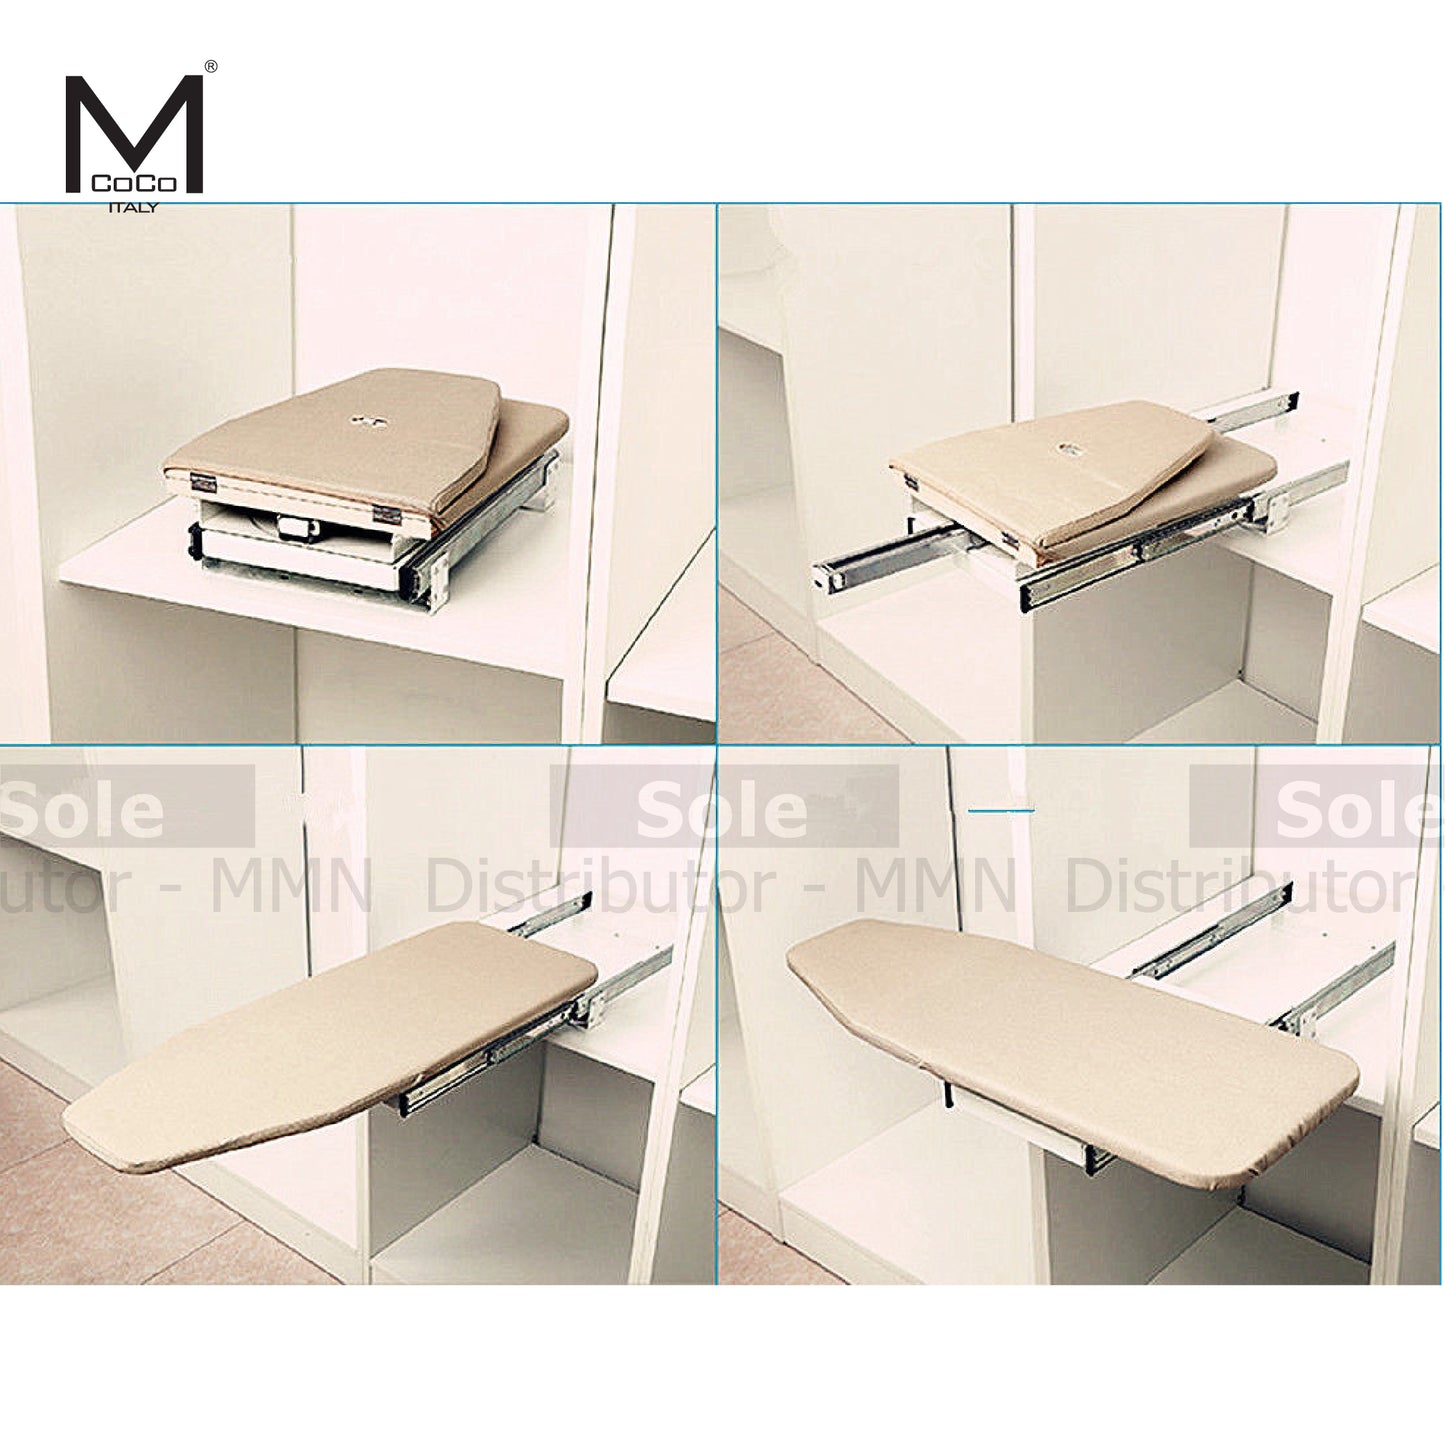 Mcoco Iron Board Foldable & Rotatable Drawer System Size L32"xD12"  - IBA310